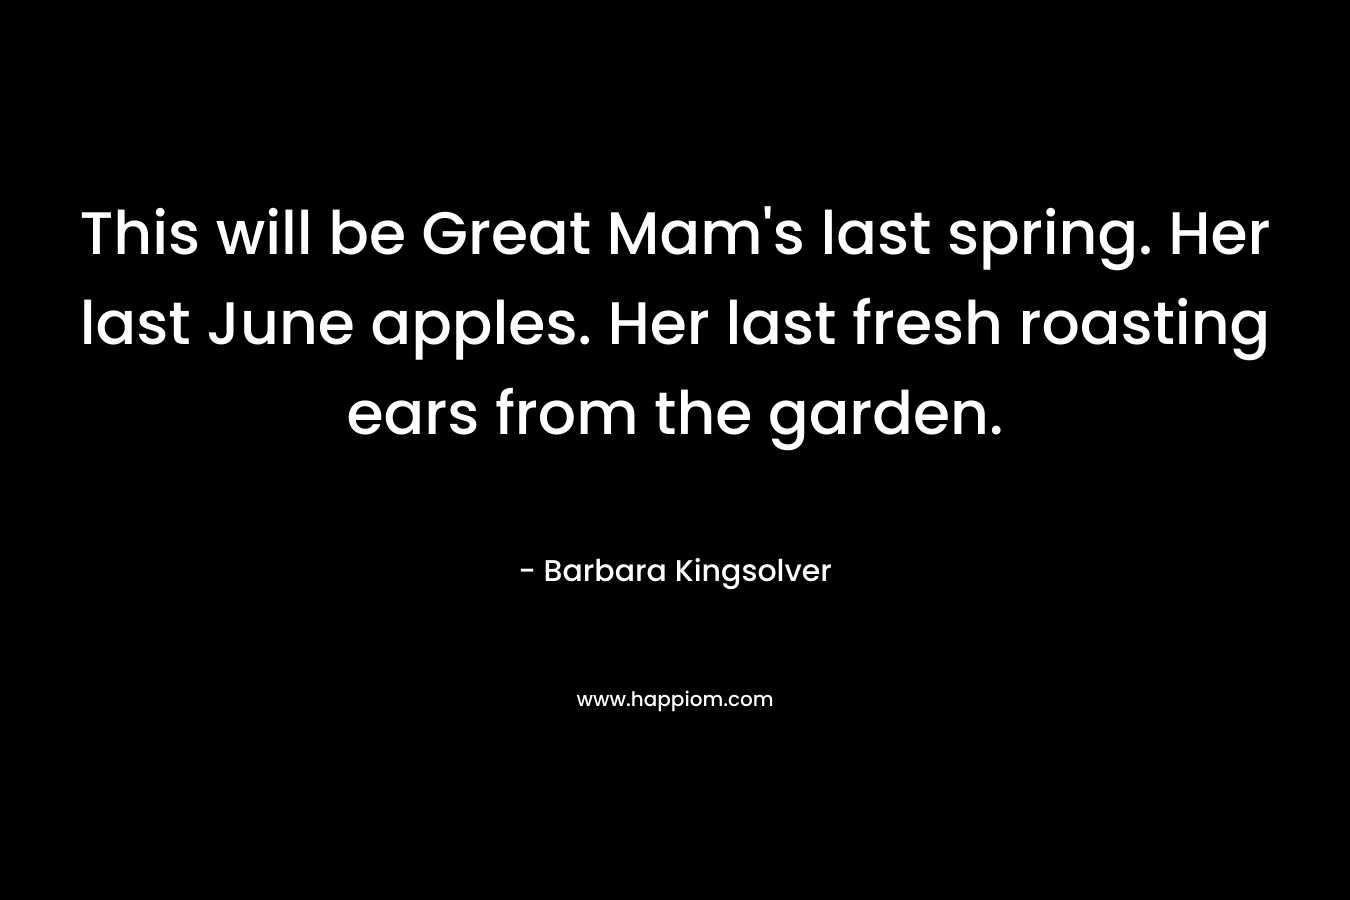 This will be Great Mam's last spring. Her last June apples. Her last fresh roasting ears from the garden.